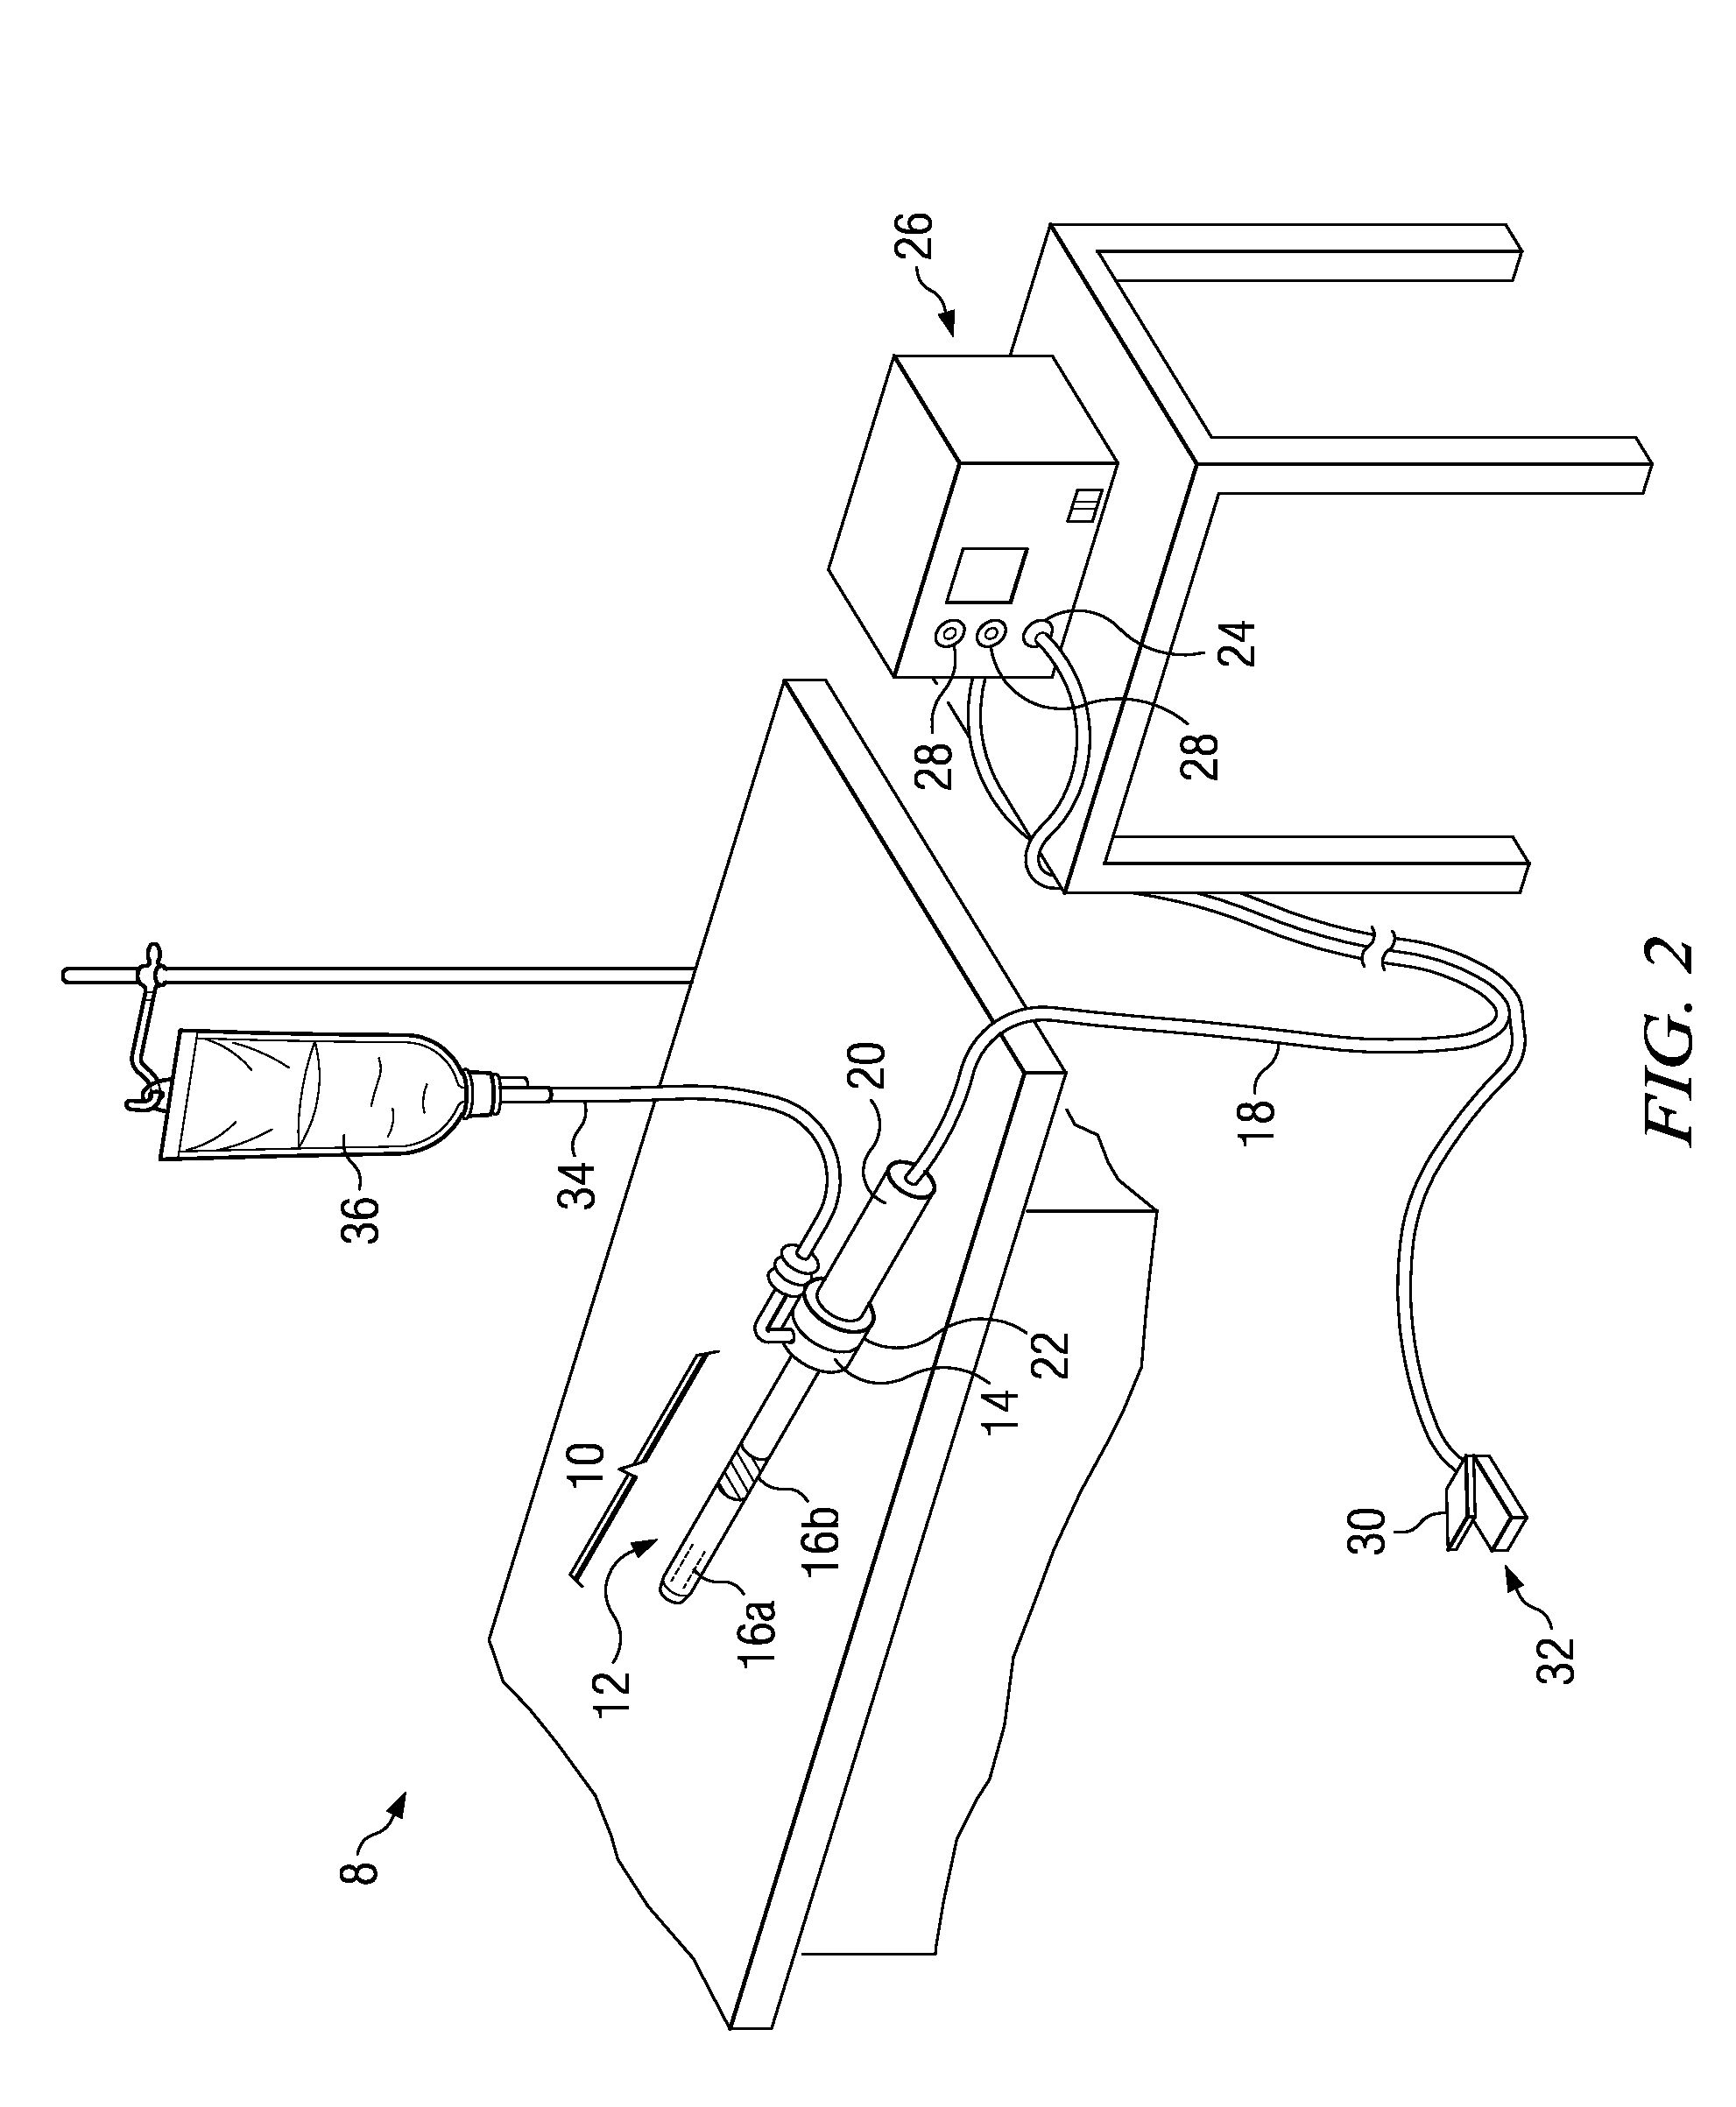 Electrosurgical system and method for sterilizing chronic wound tissue